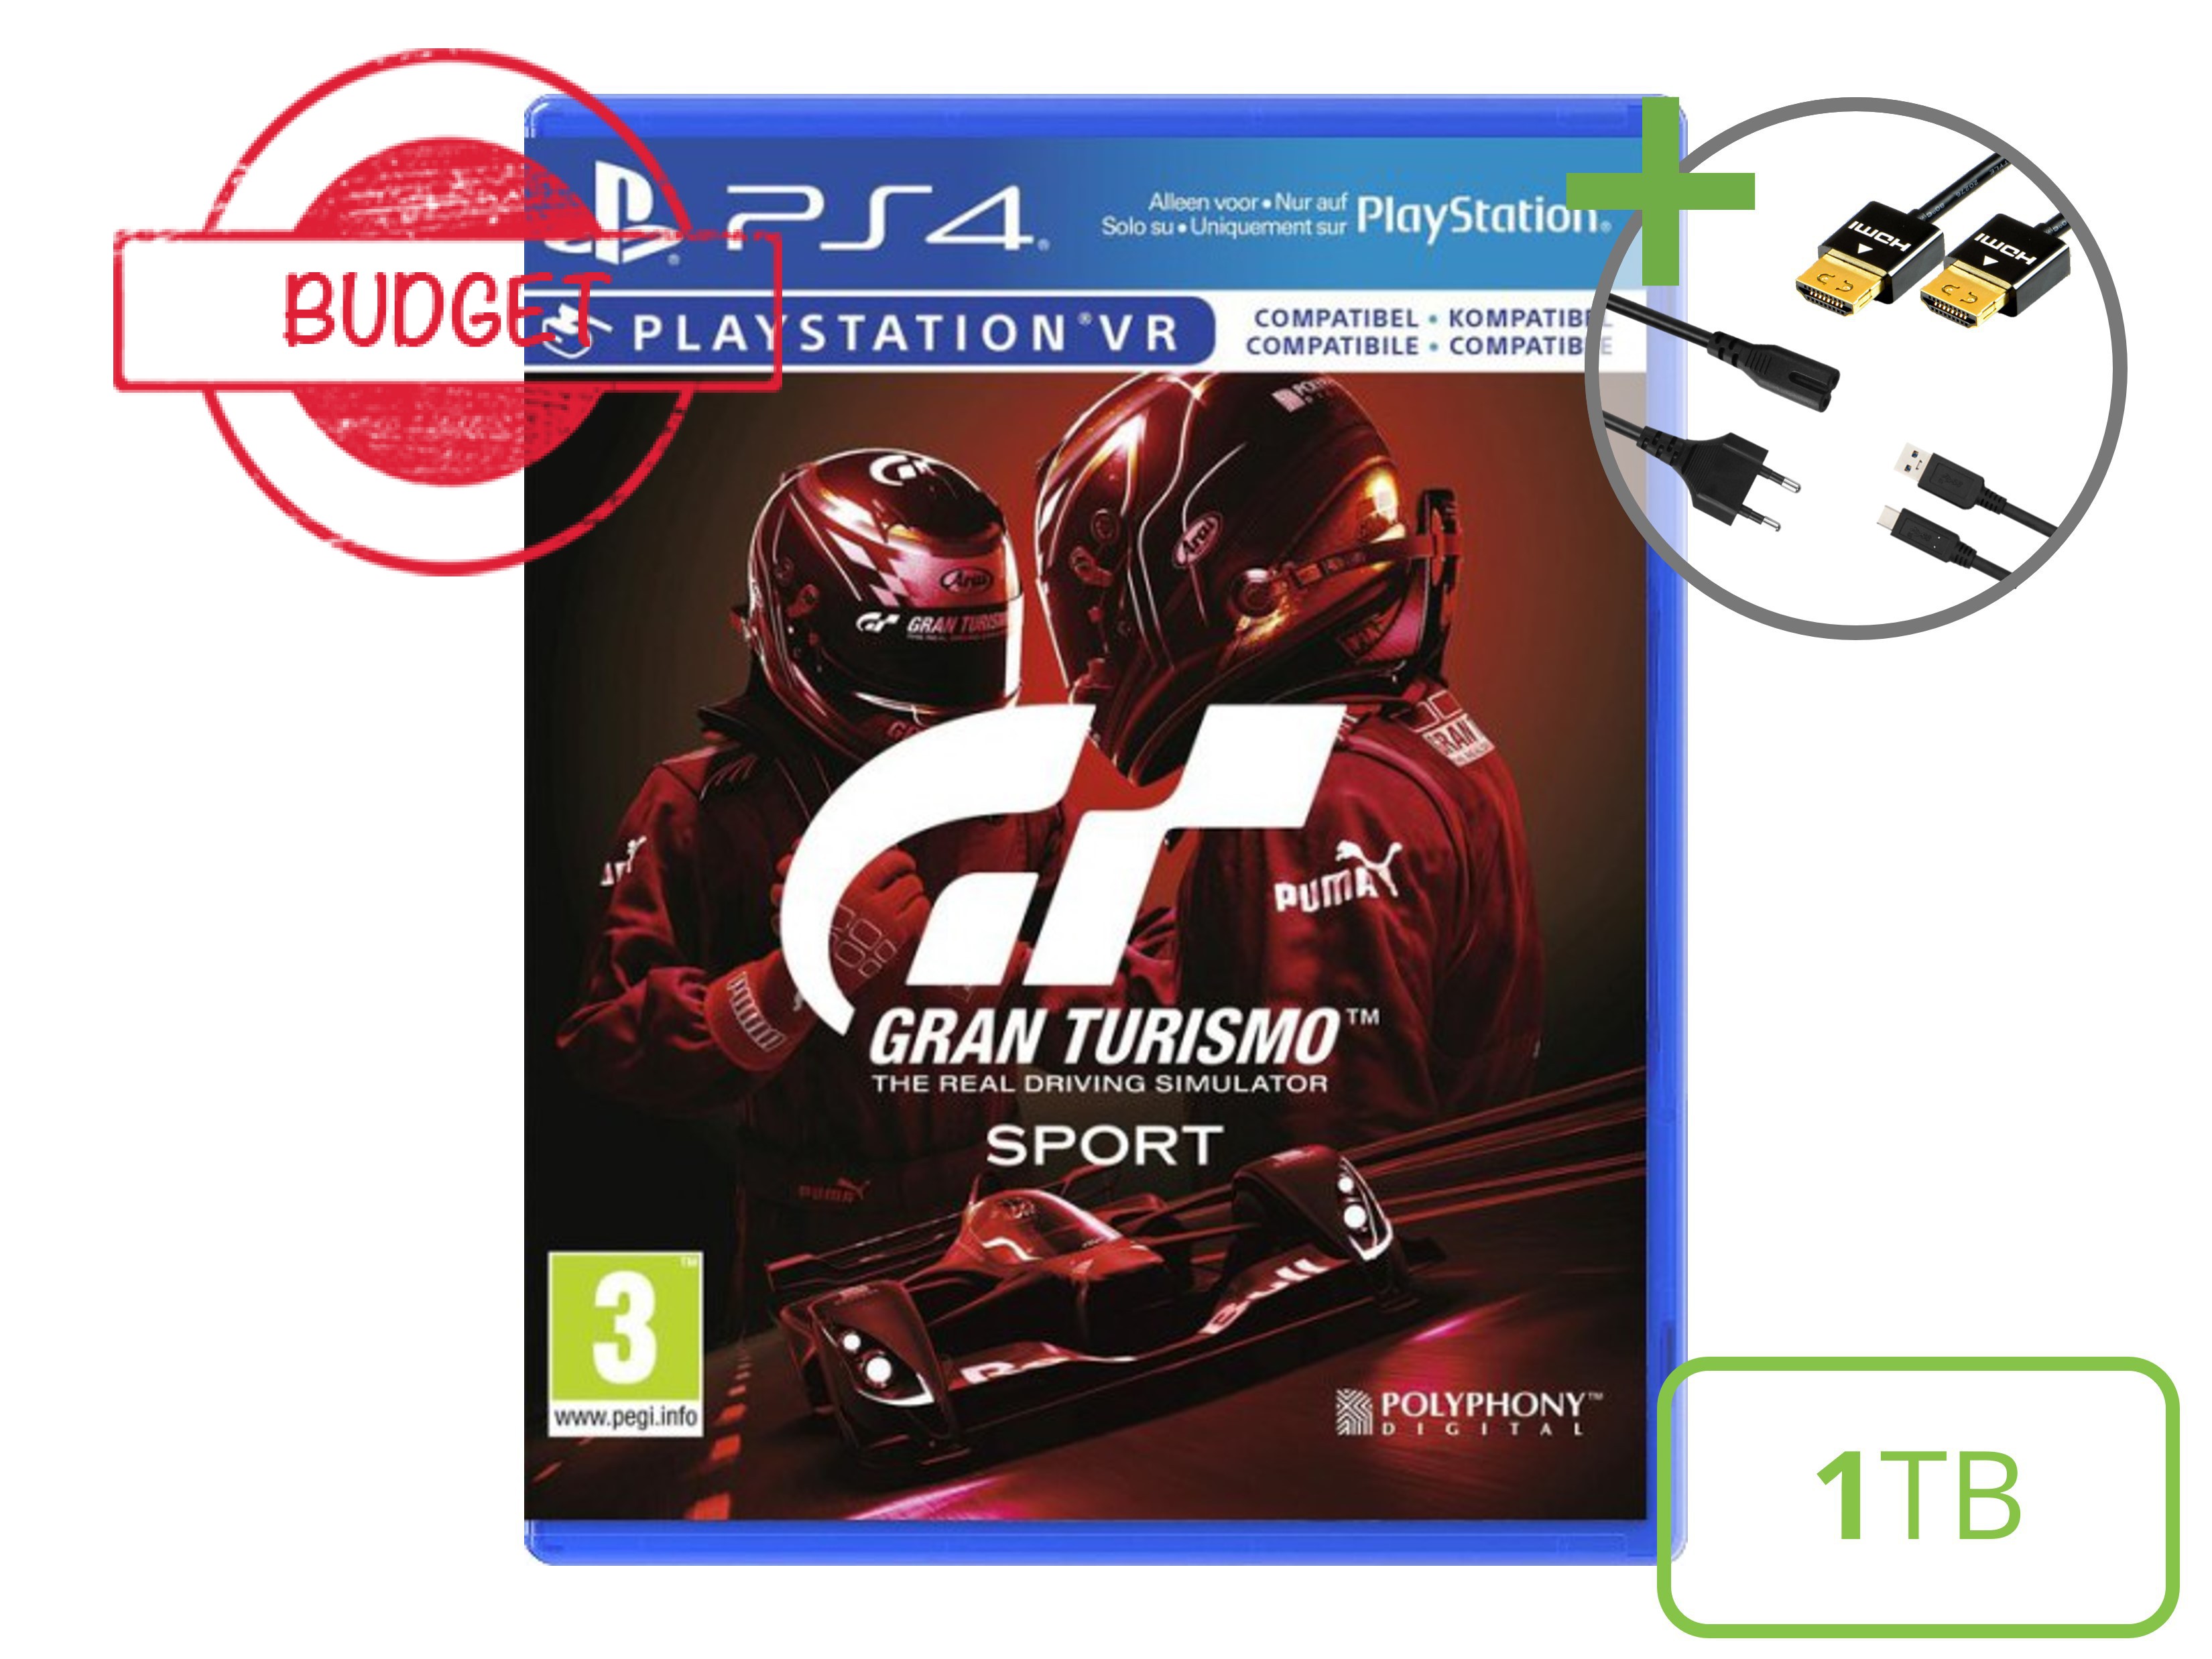 Sony PlayStation 4 Pro Starter Pack - 1TB Gran Turismo Sport Edition - Budget - Playstation 4 Hardware - 5